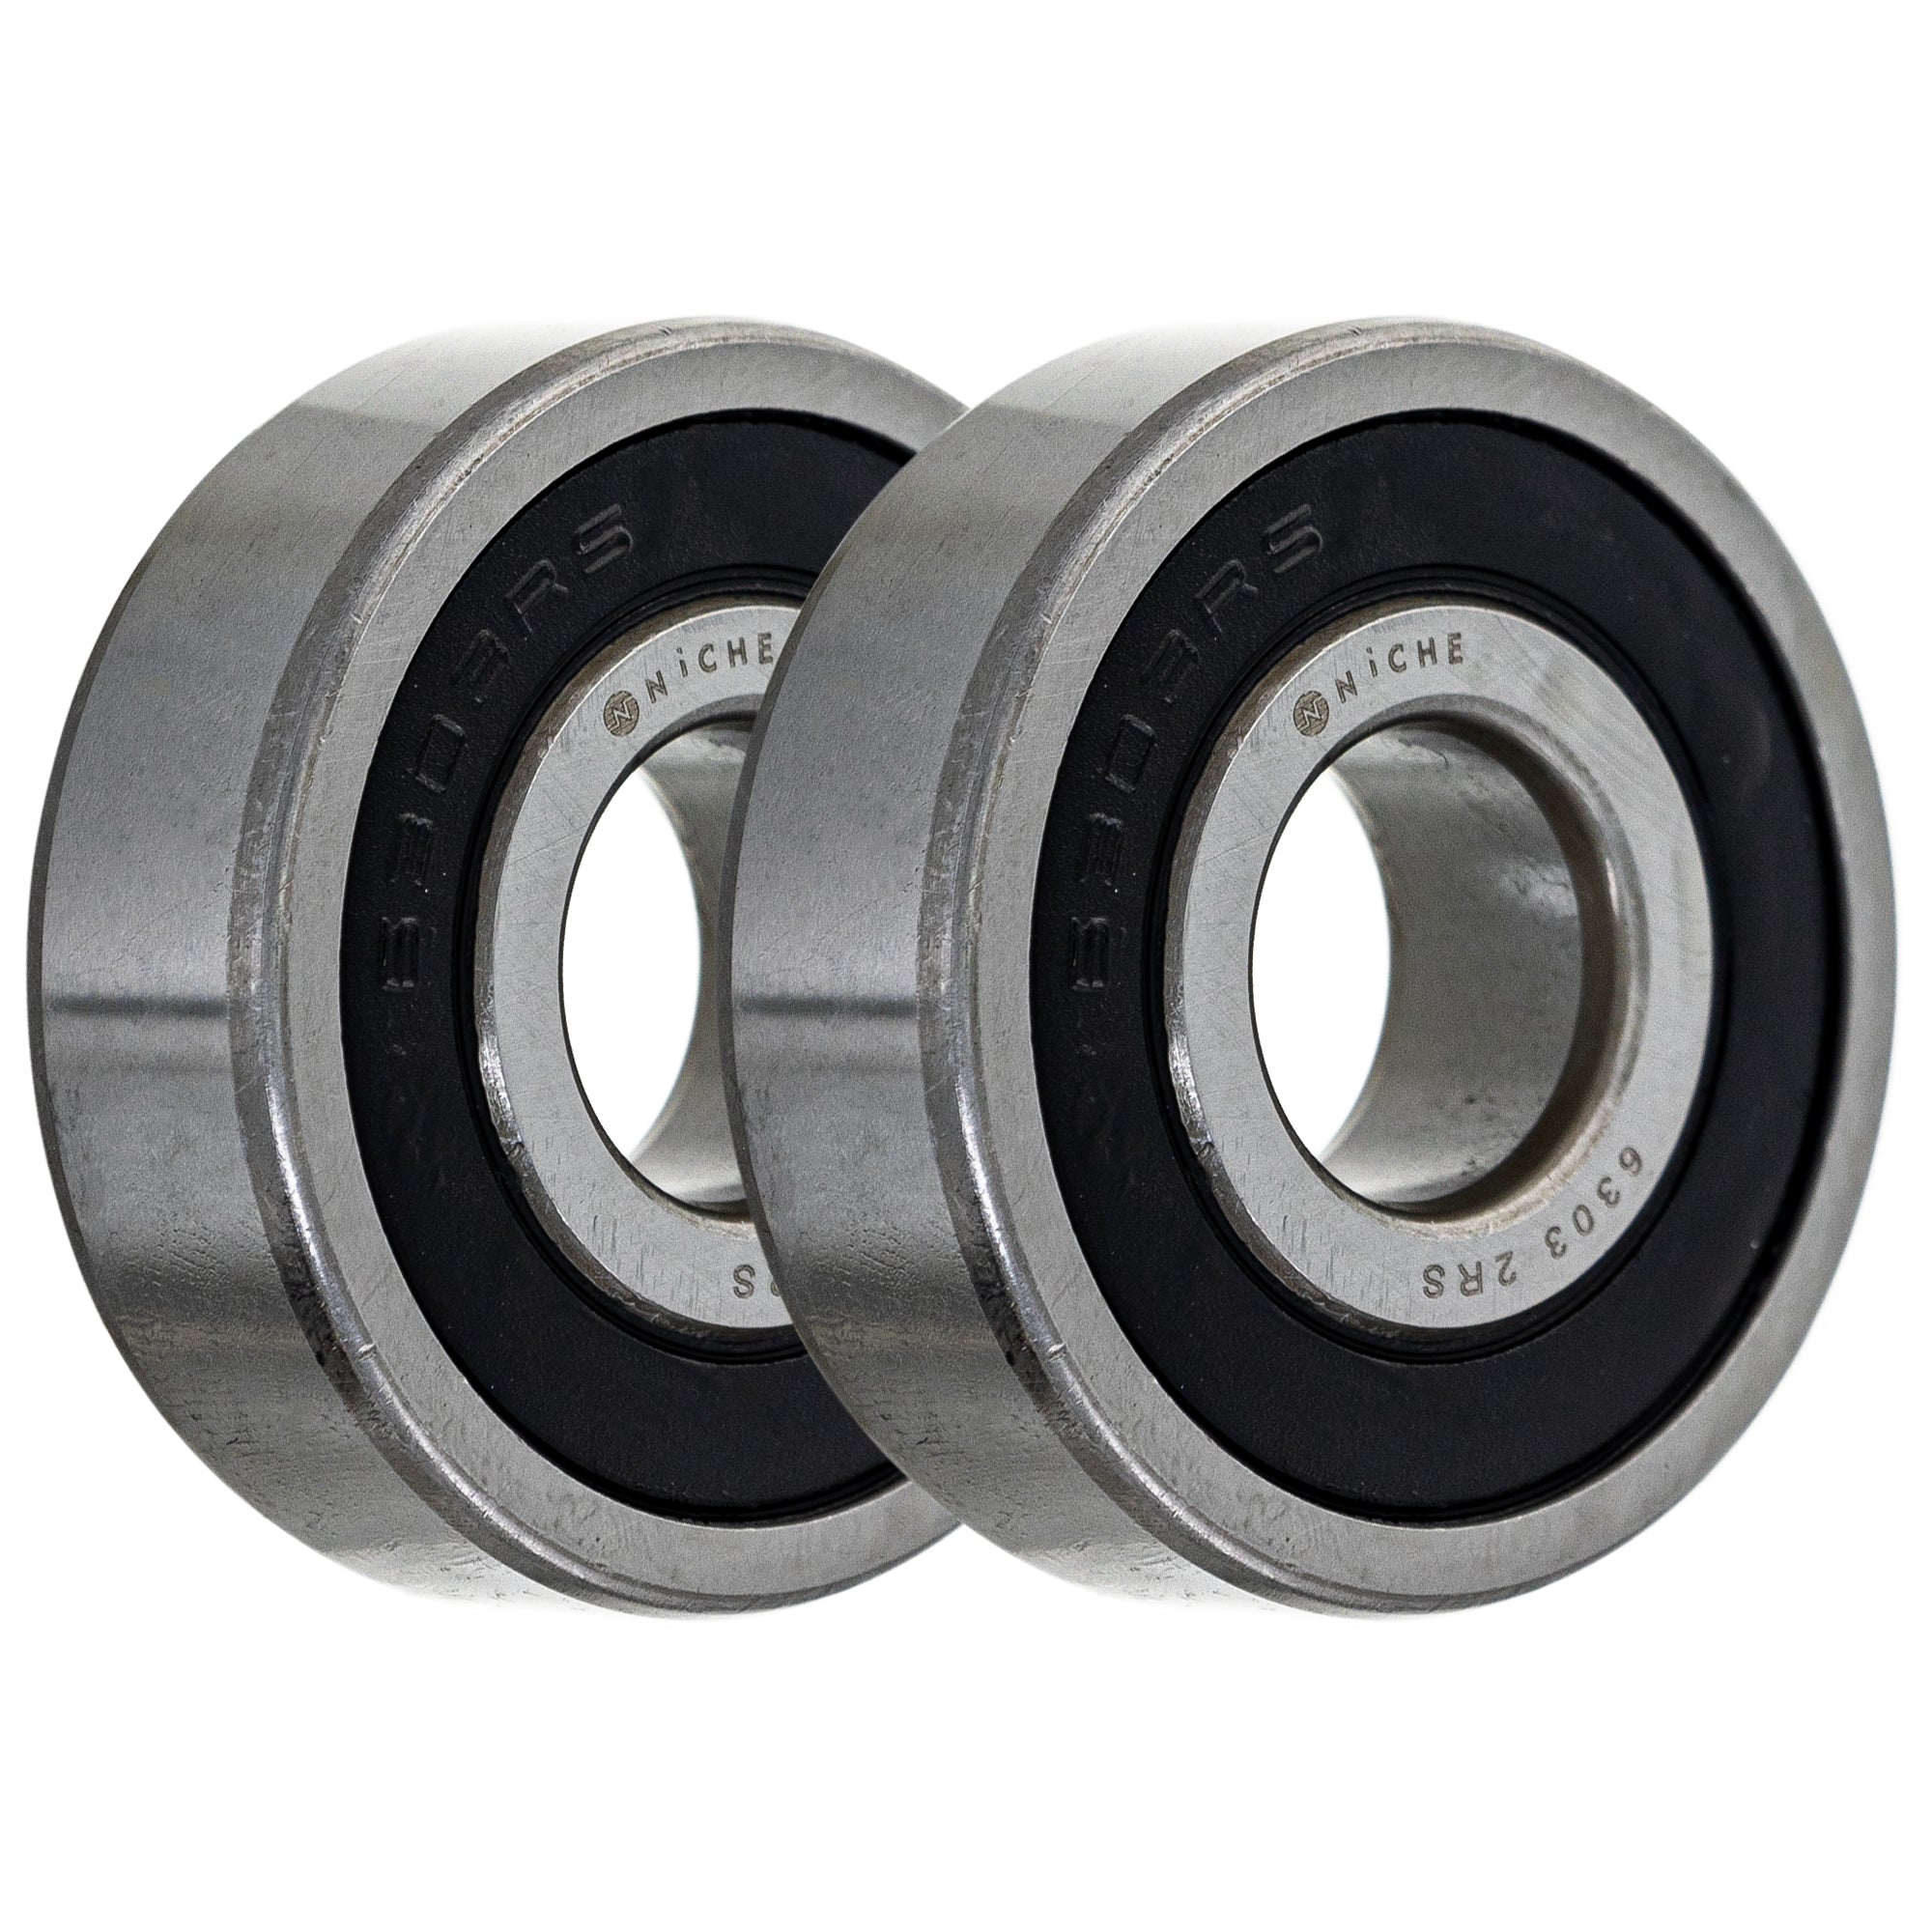 Single Row, Deep Groove, Ball Bearing Pack of 2 2-Pack for zOTHER Zephyr XS850 XS650S2 NICHE 519-CBB2236R